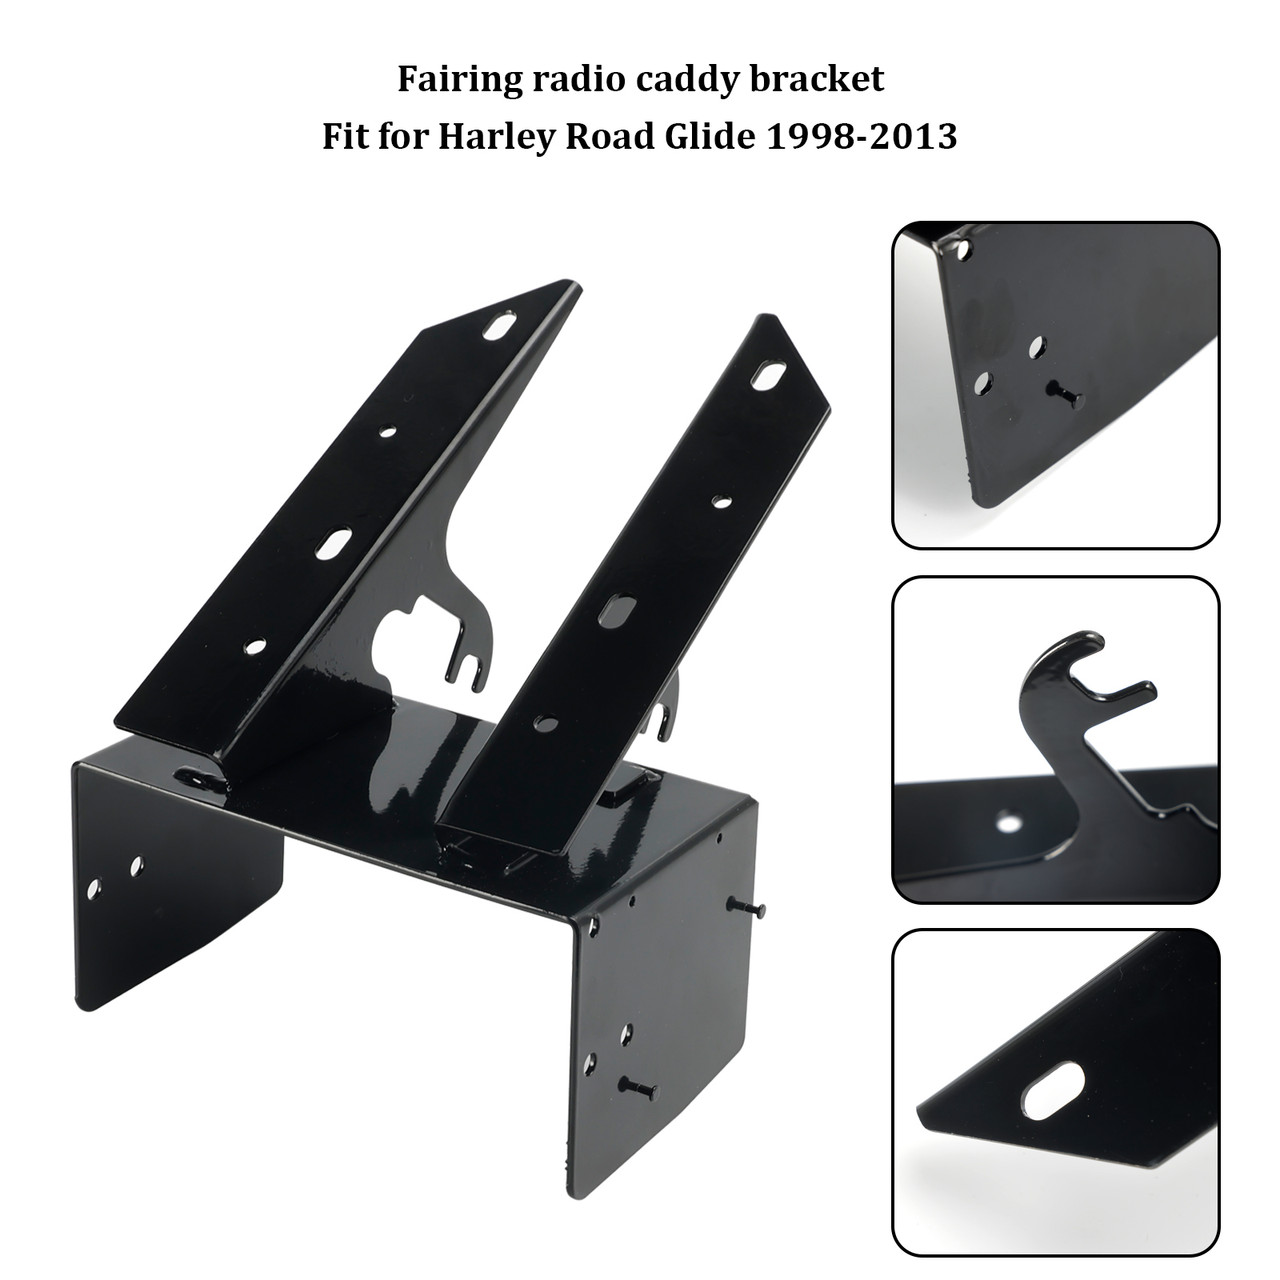 Steel Front Fairing Radio Caddy Mount Bracket Fit For Road Glide 1998-2013